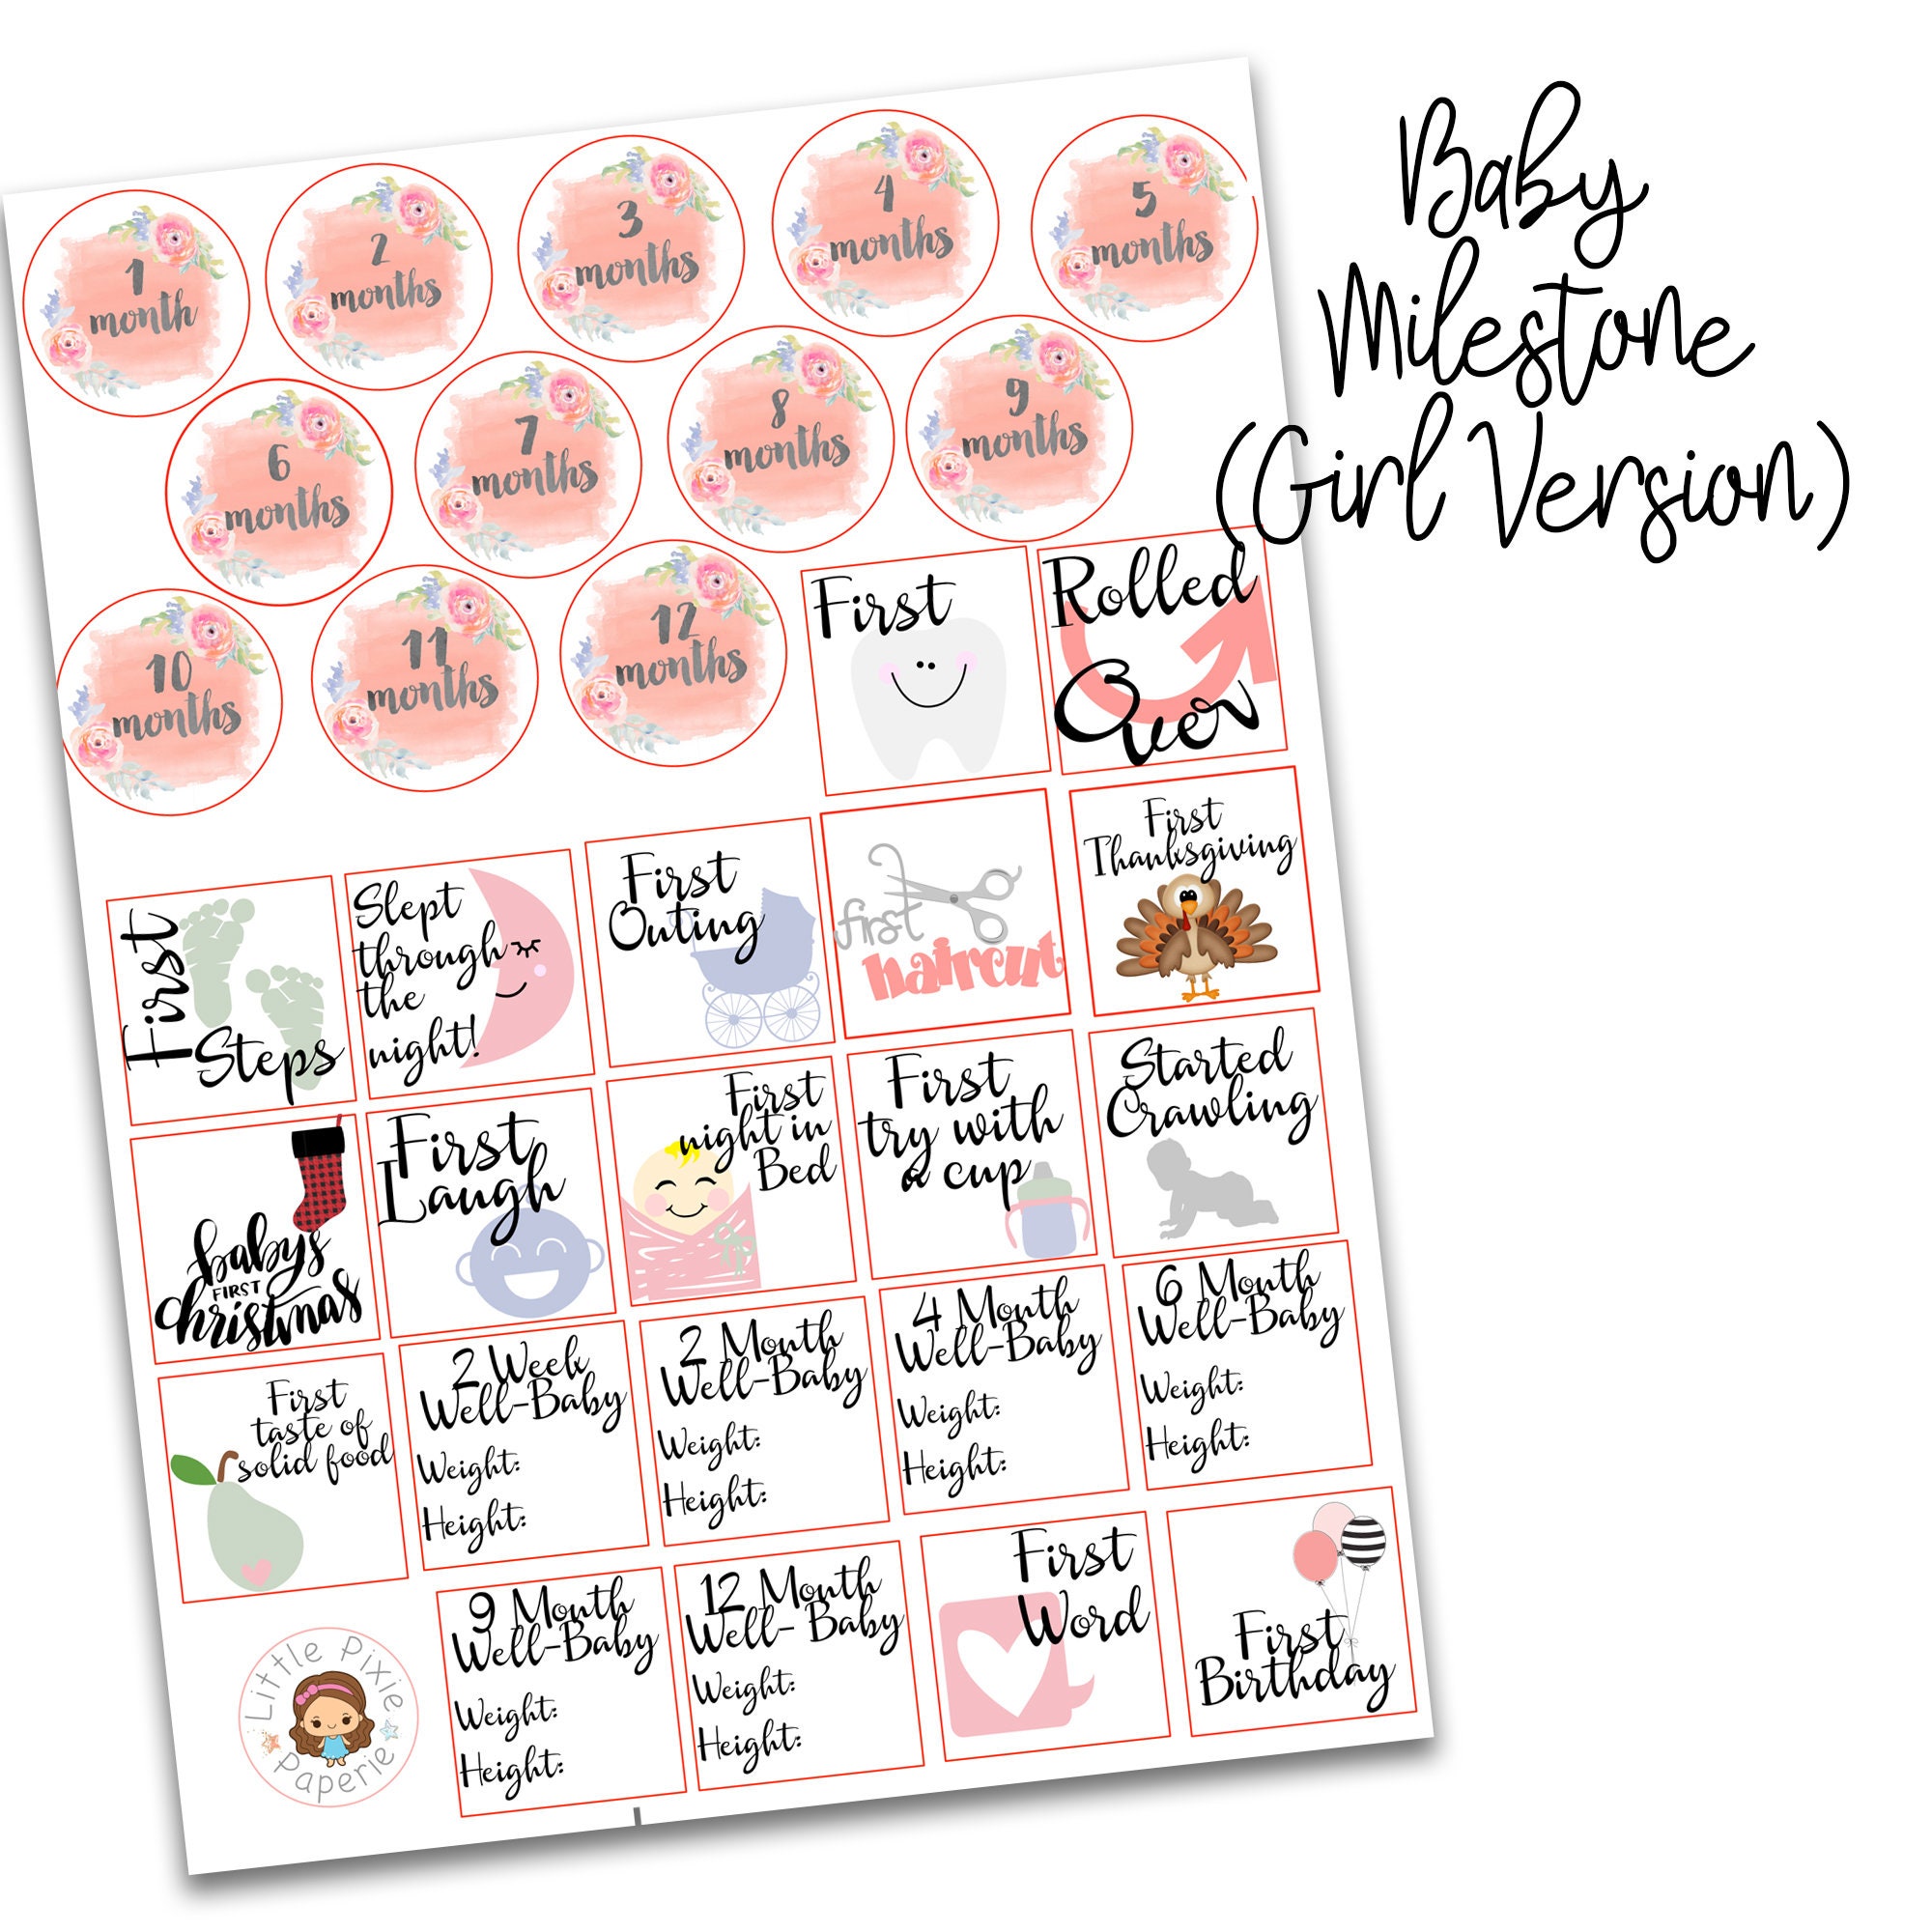 Months in Motion 318 Baby Boy Month Stickers for Newborn Primary